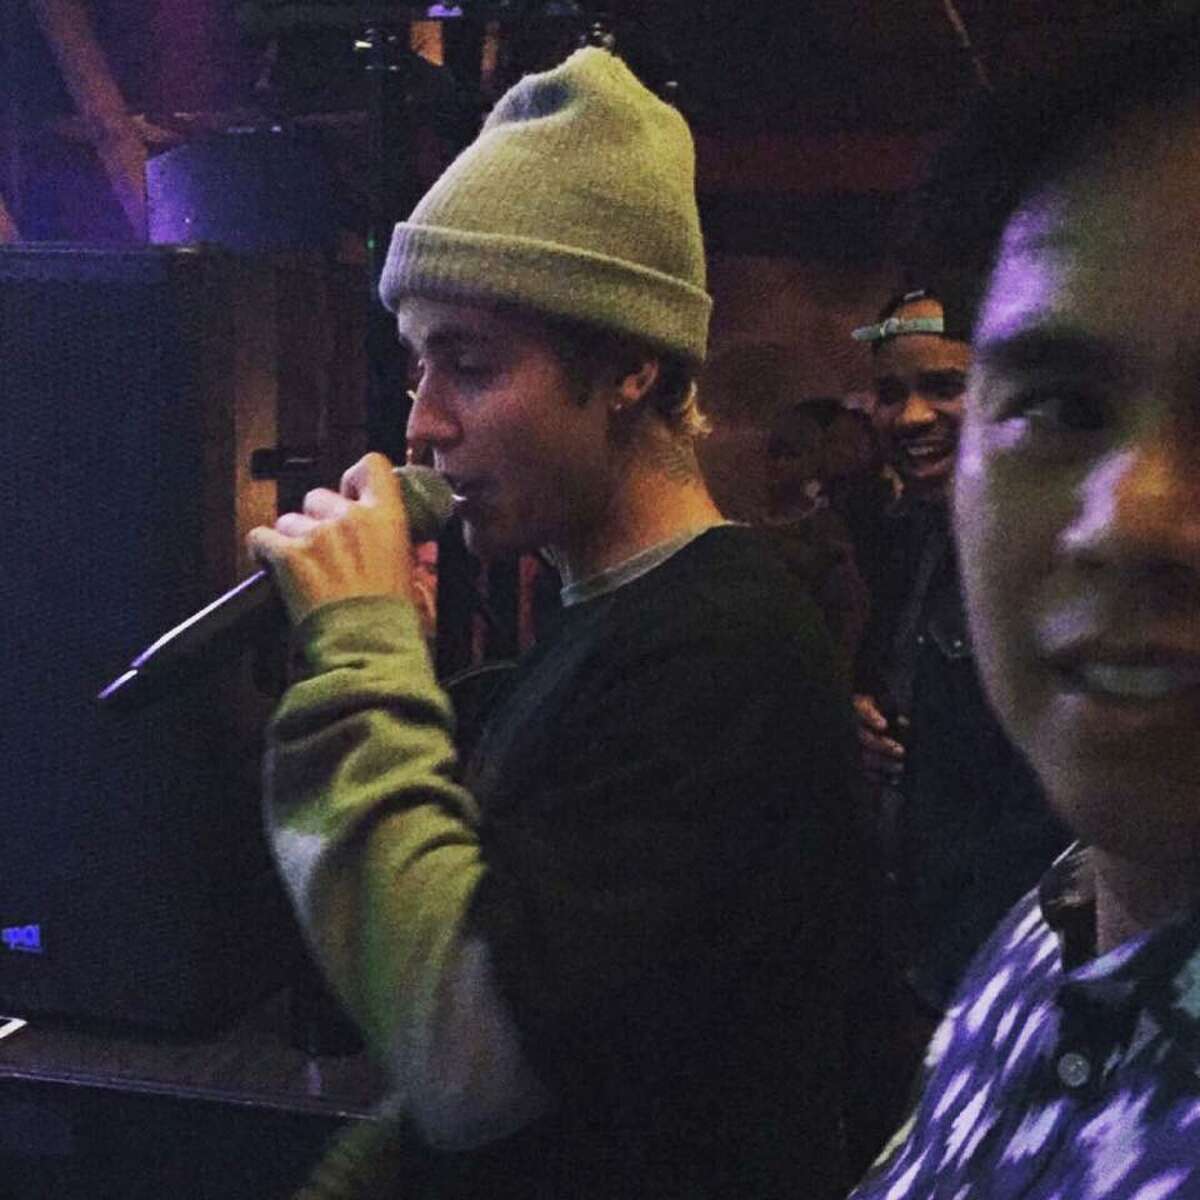 Justin Bieber partied at Cle on Main after his Saturday show.